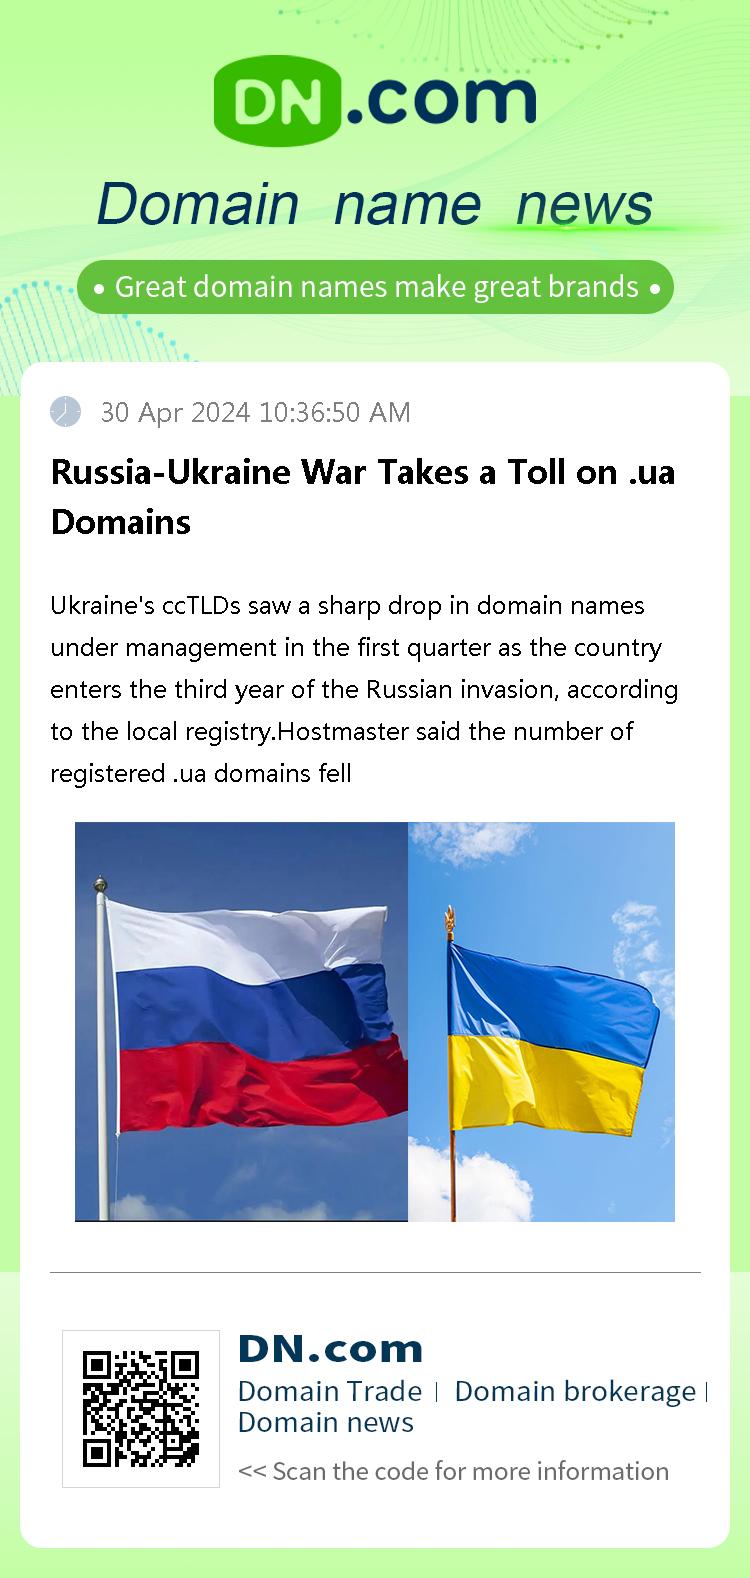 Russia-Ukraine War Takes a Toll on .ua Domains